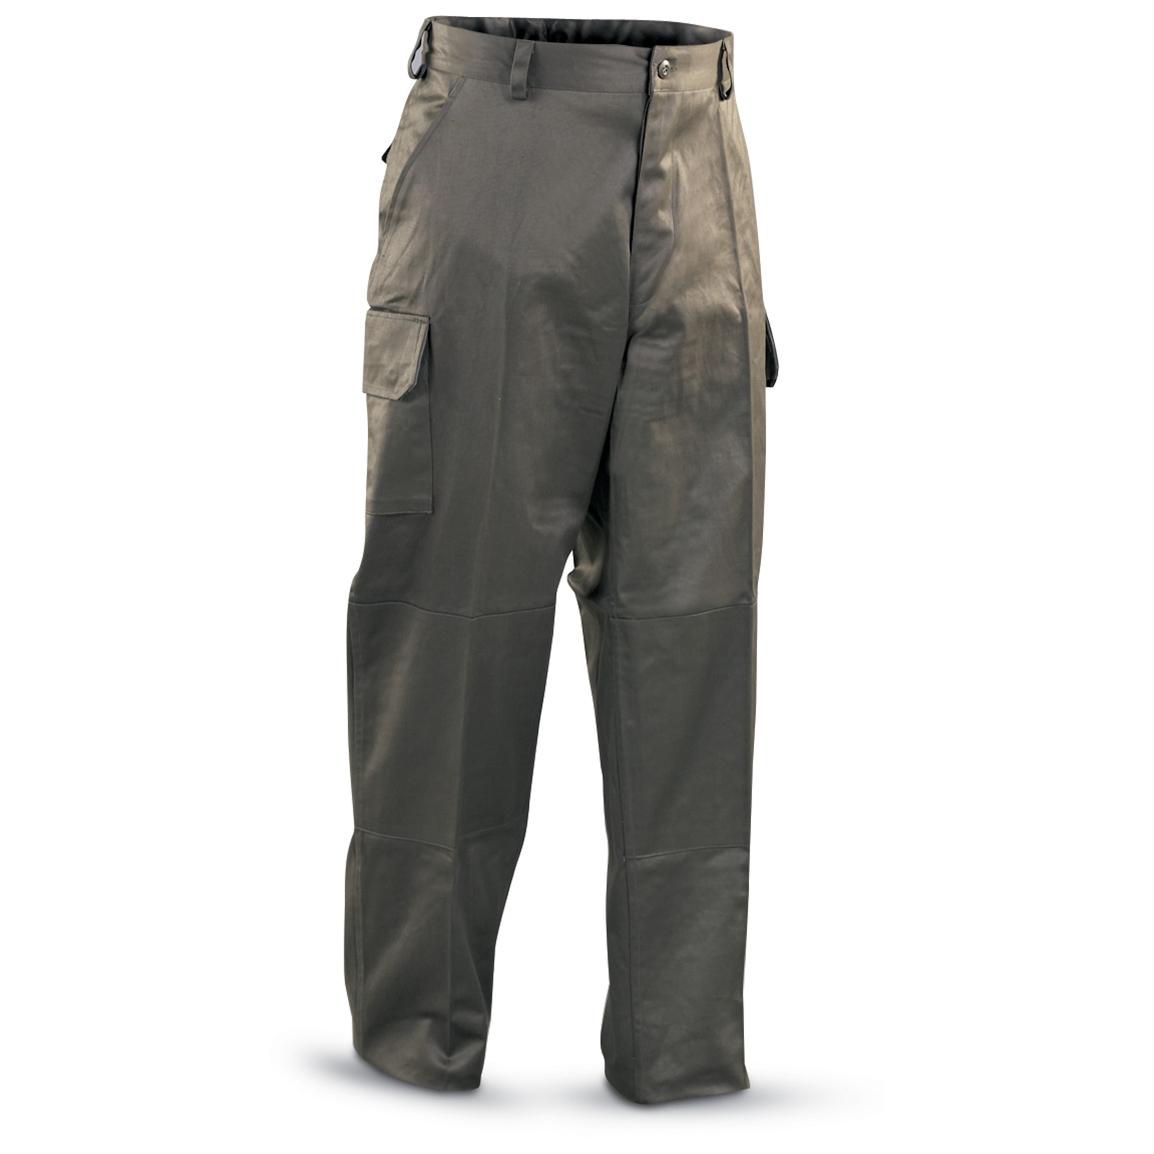 Mil-Tec® French F1-style Pants, O.D. - 103628, Pants at Sportsman's Guide